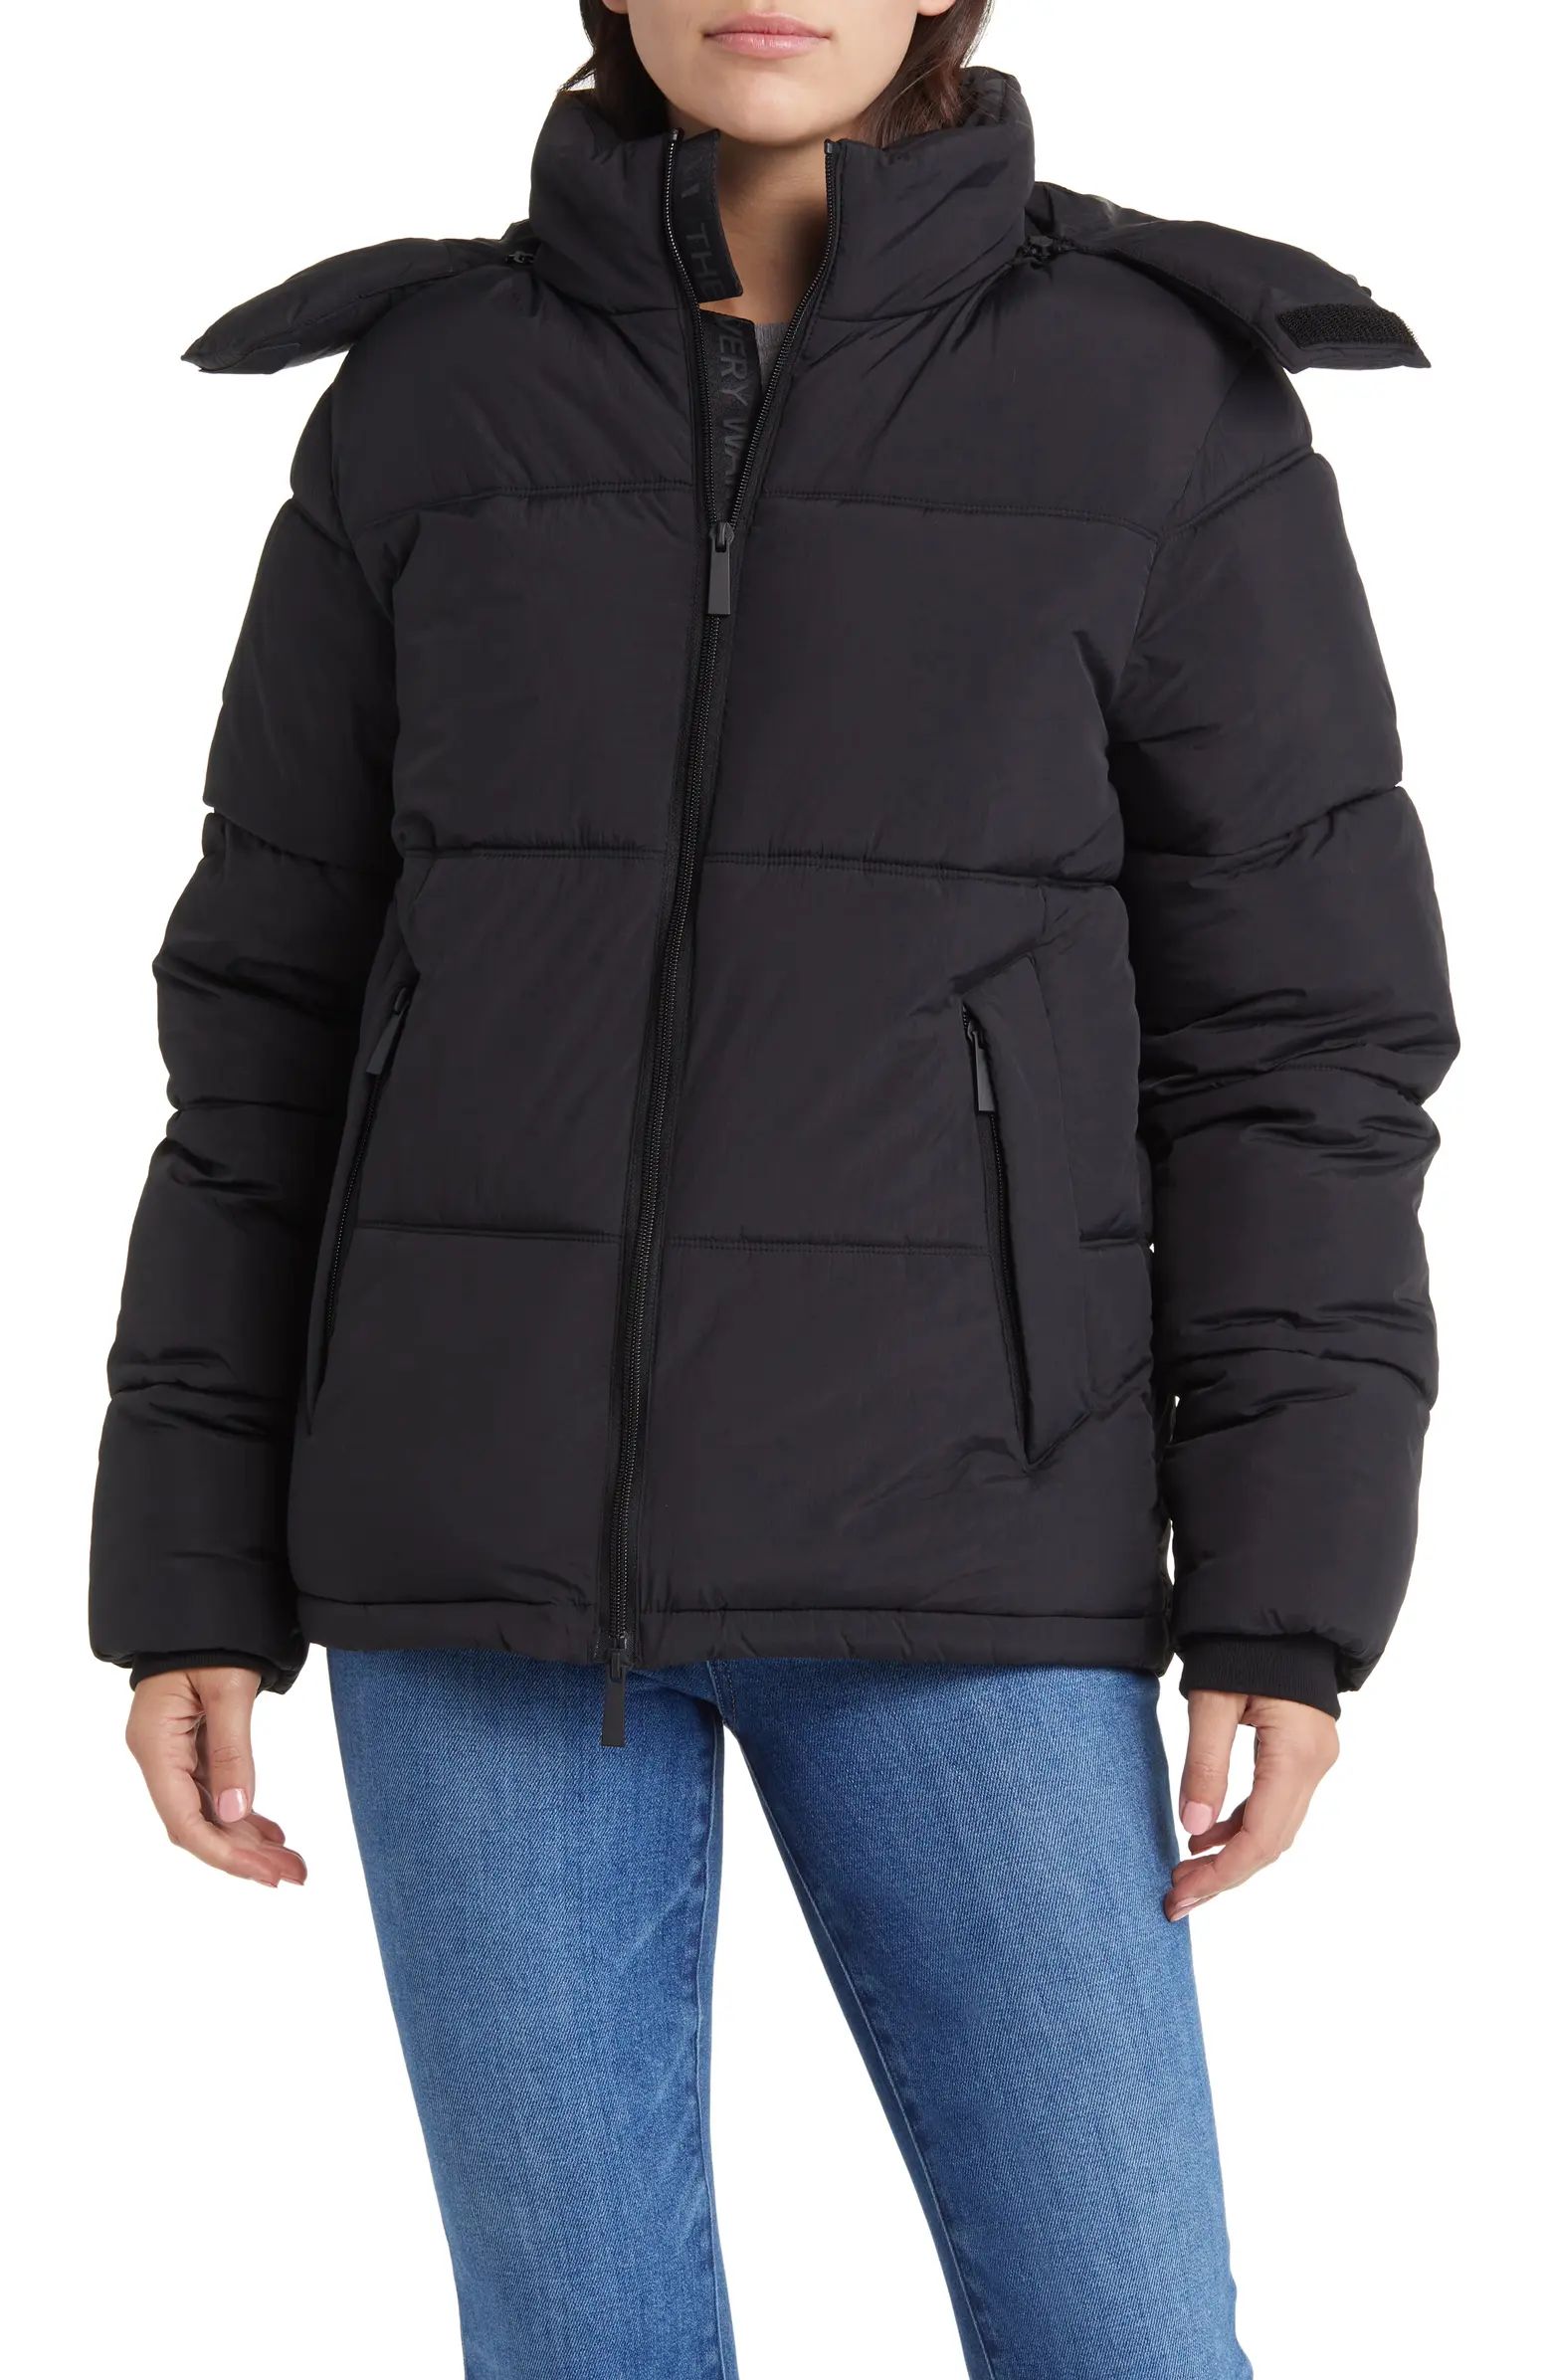 The Very Warm Hooded Water Resistant 500 Fill Power Down Recycled Nylon Puffer Jacket | Nordstrom | Nordstrom